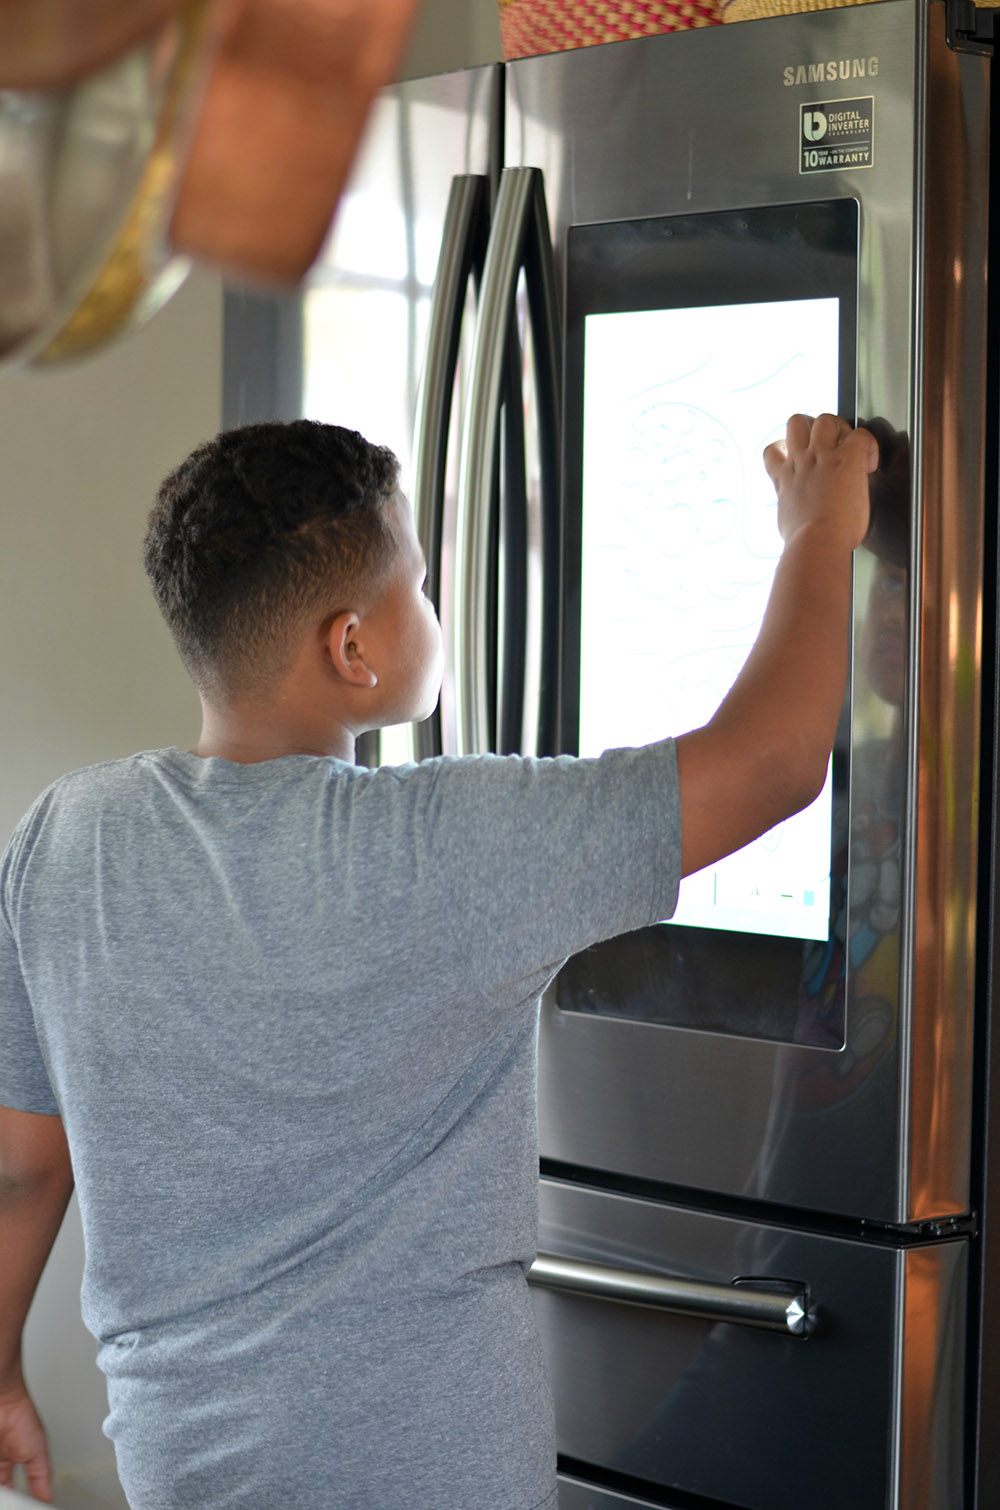 A young boy touches the screen display on a Samsung smart refrigerator.